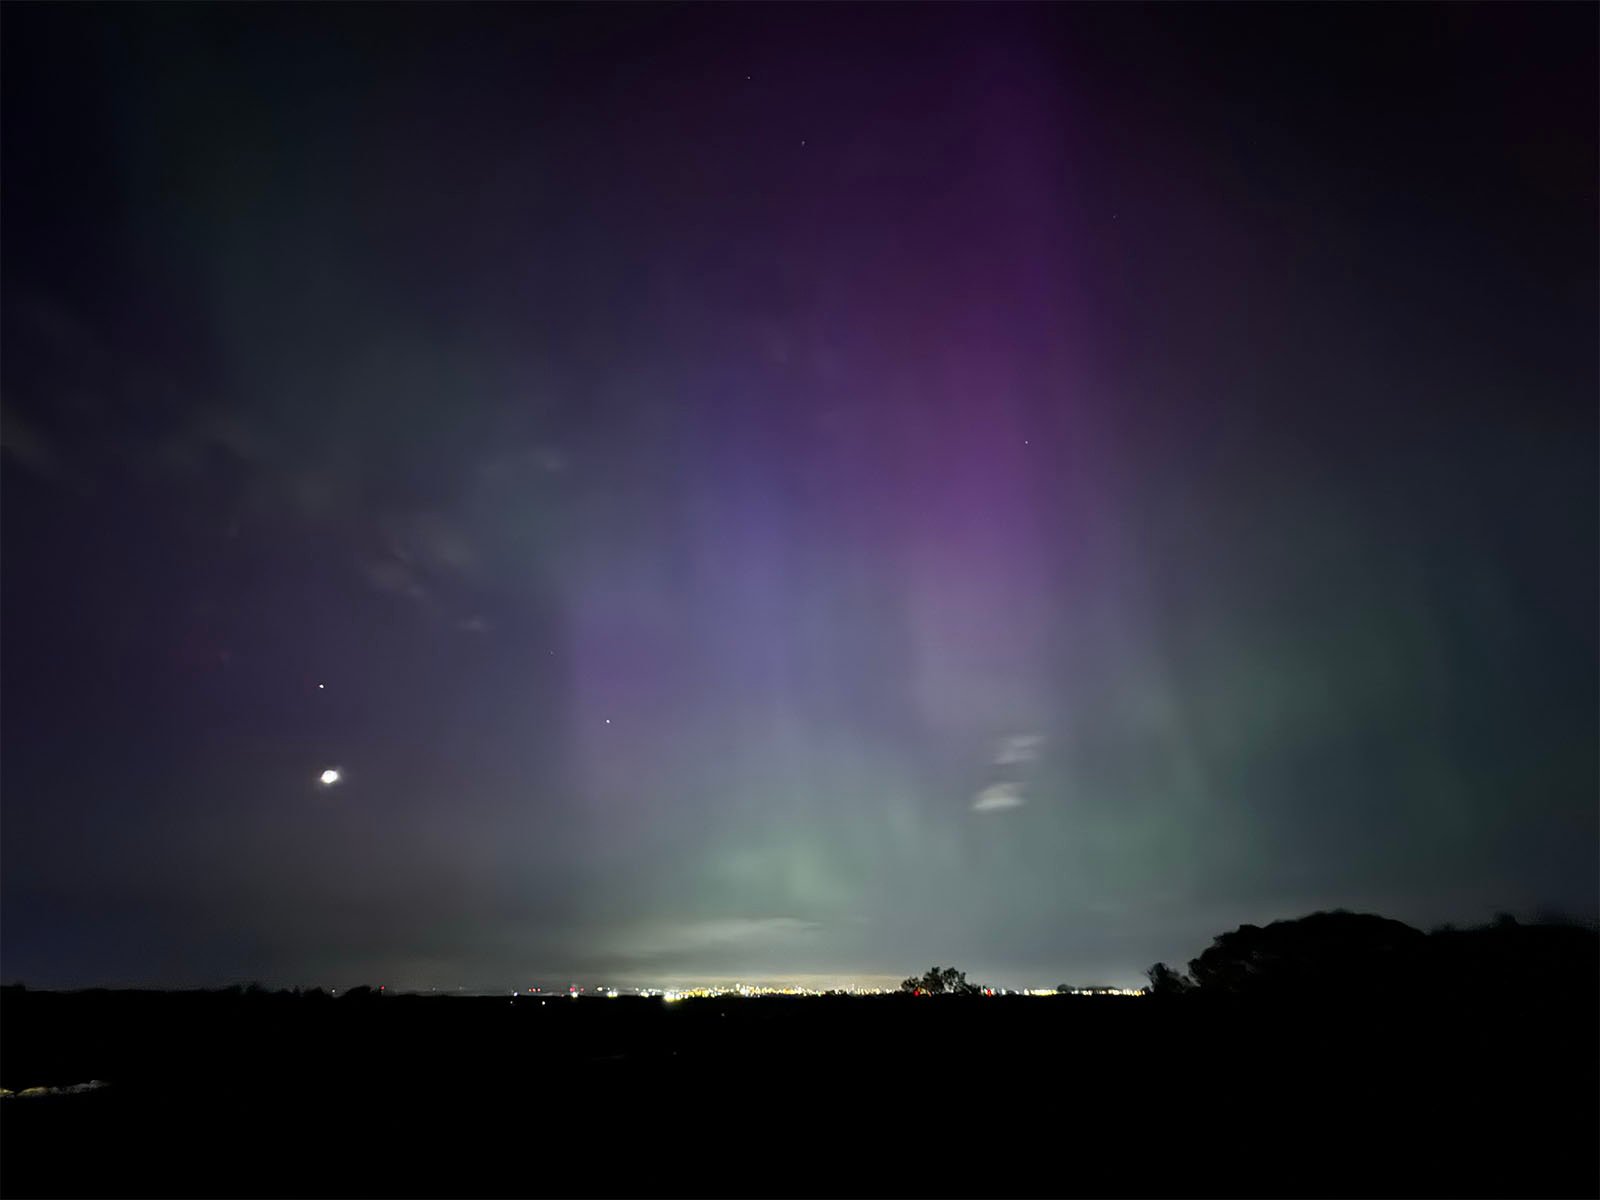 A night sky illuminated by a pale purple aurora with stars visible and a bright celestial body, possibly a planet or moon, shining vividly above a faintly lit landscape.